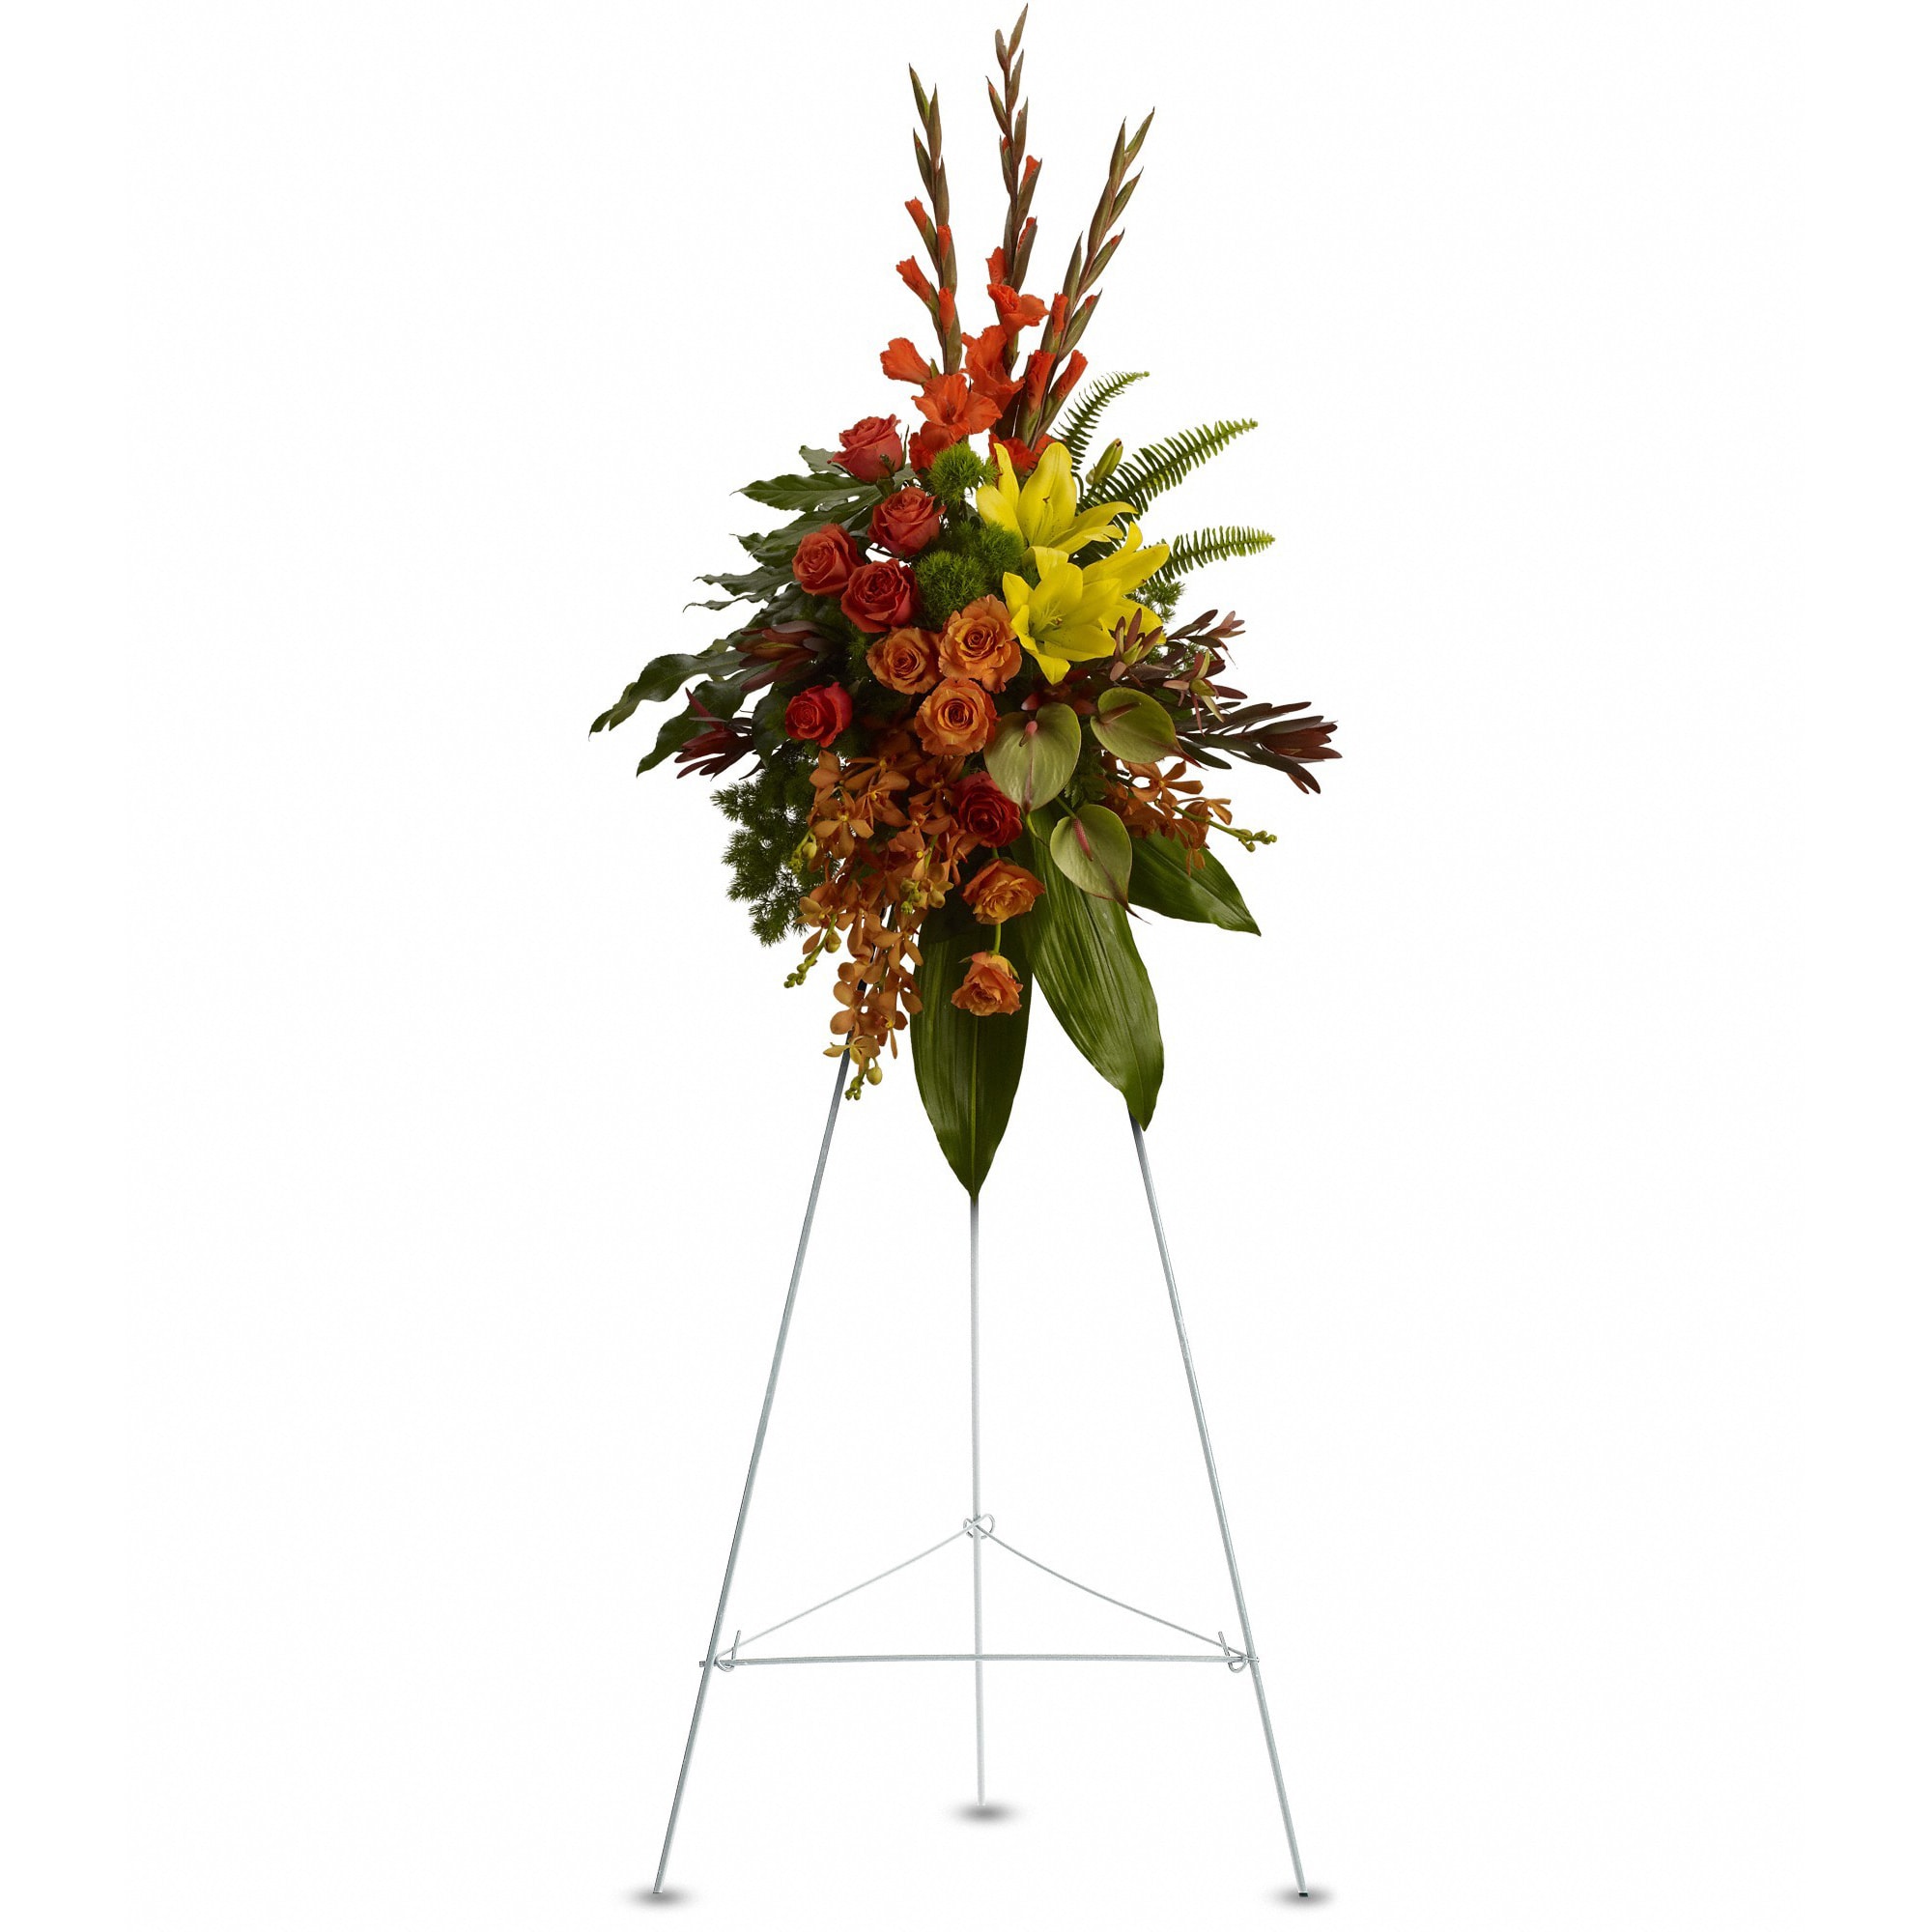 Tropical Tribute Spray by Teleflora - Tropical highlights balance with lush earth tones to offer hope and encourage reflection - a vivid spray that expresses deep and generous tribute.  